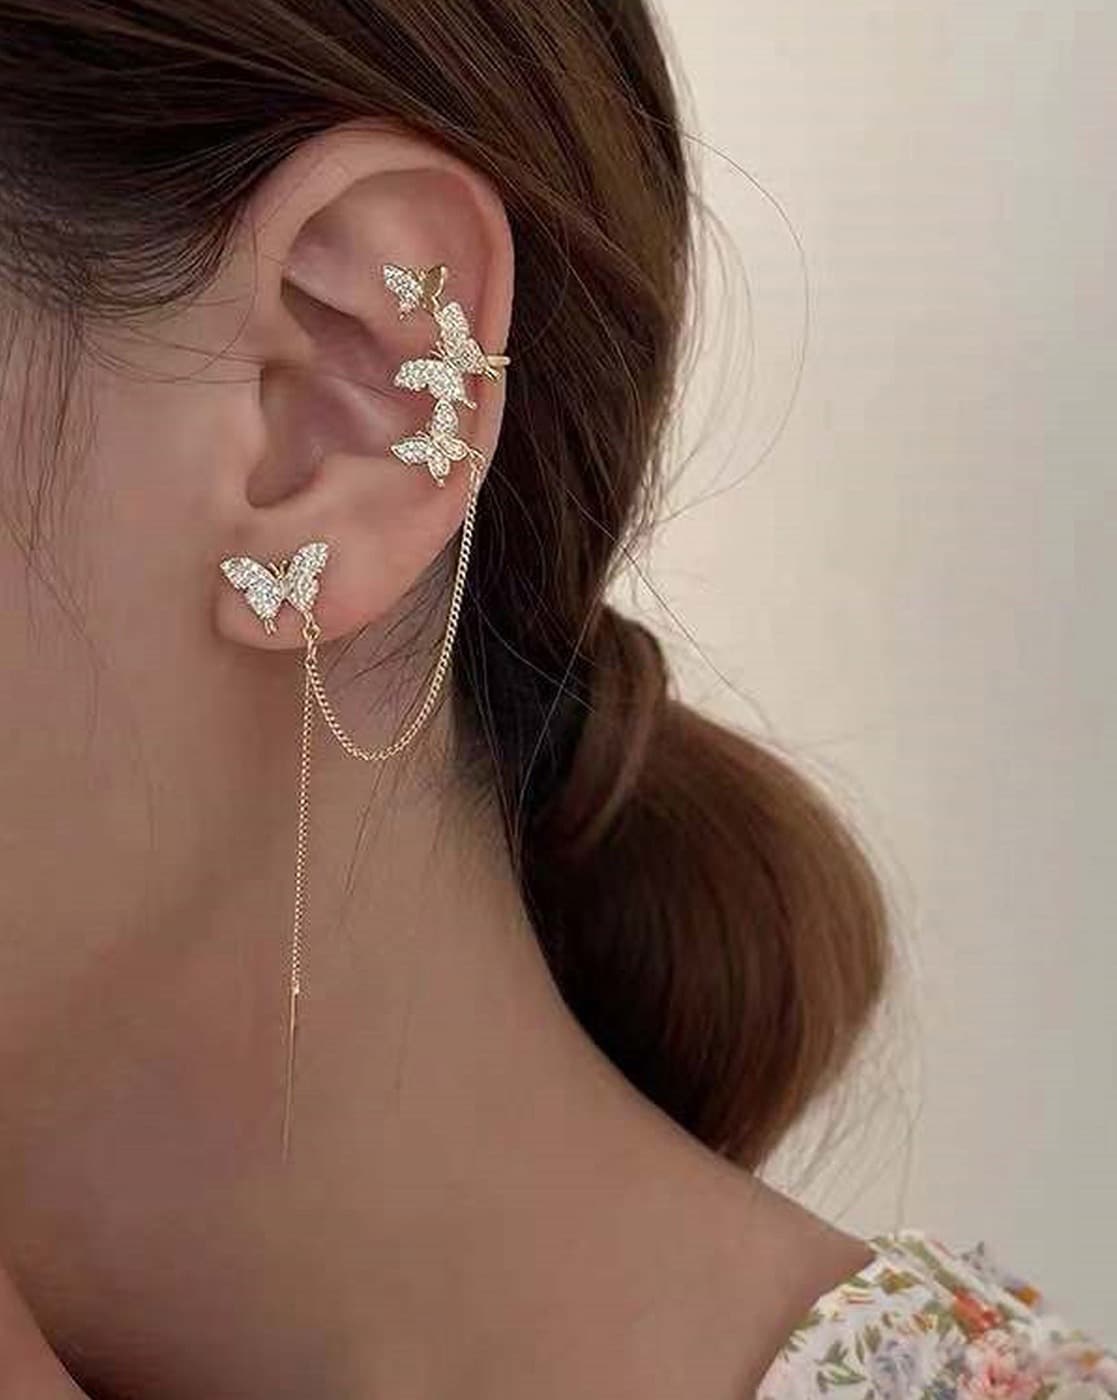 Fashion Korean Earrings For Women Exquisite Luxury Shiny Crystals Stud Hoop  Earrings Accessories Jewelry 2023 Trend (Ed158-1) : Buy Online at Best  Price in KSA - Souq is now Amazon.sa: Fashion